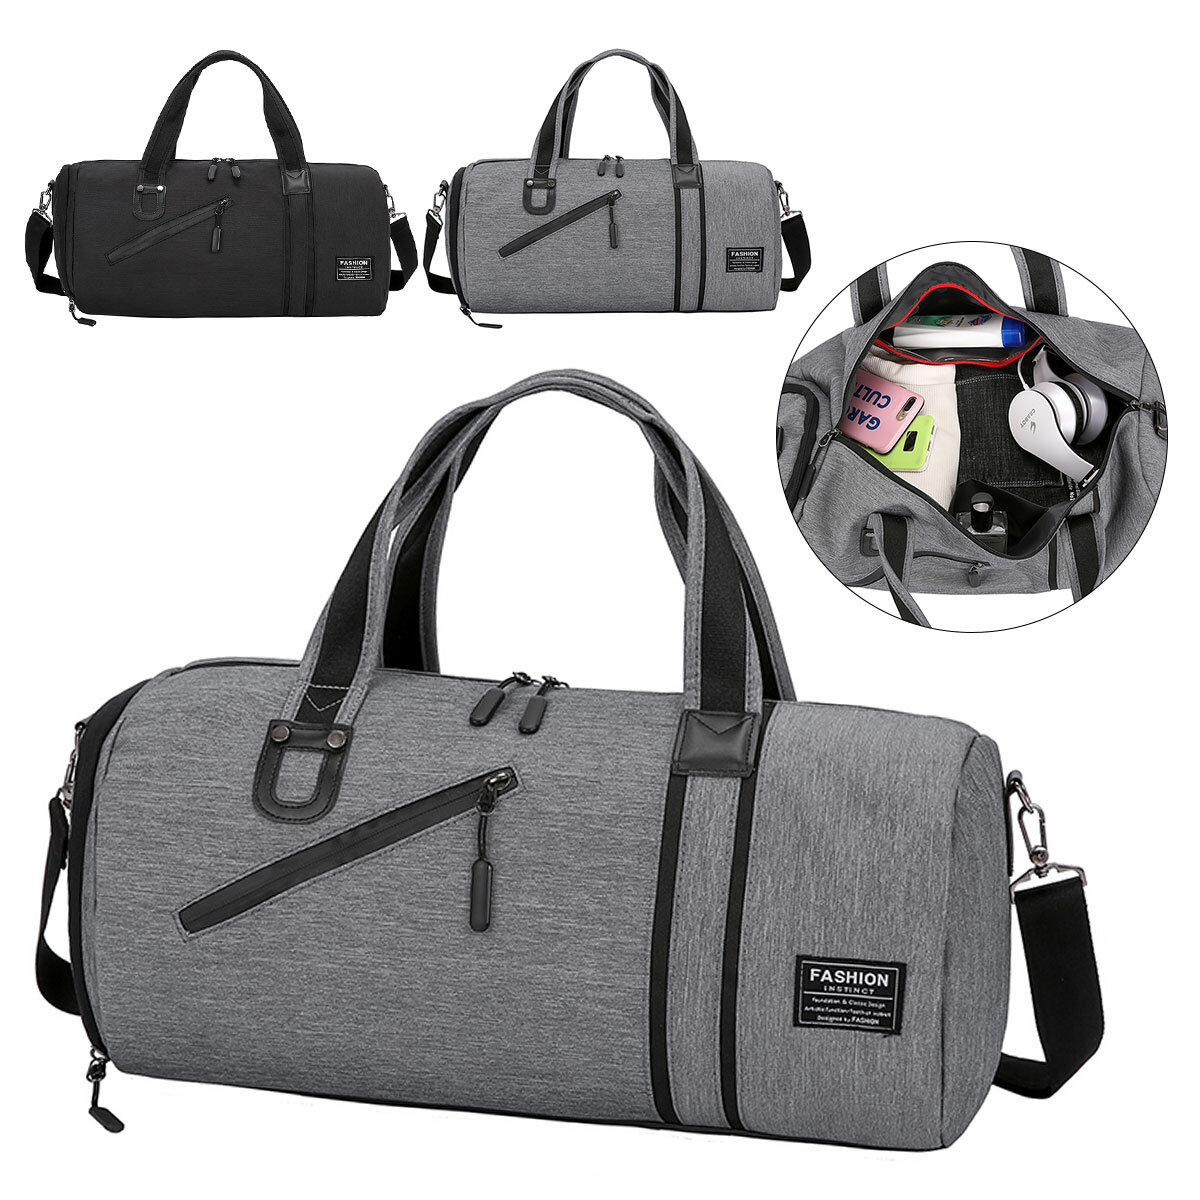 Large Capacity Waterproof Outdoor Sports Fitness Bag Shoulder Bag Duffel Gym Bag with Shoes Compartment